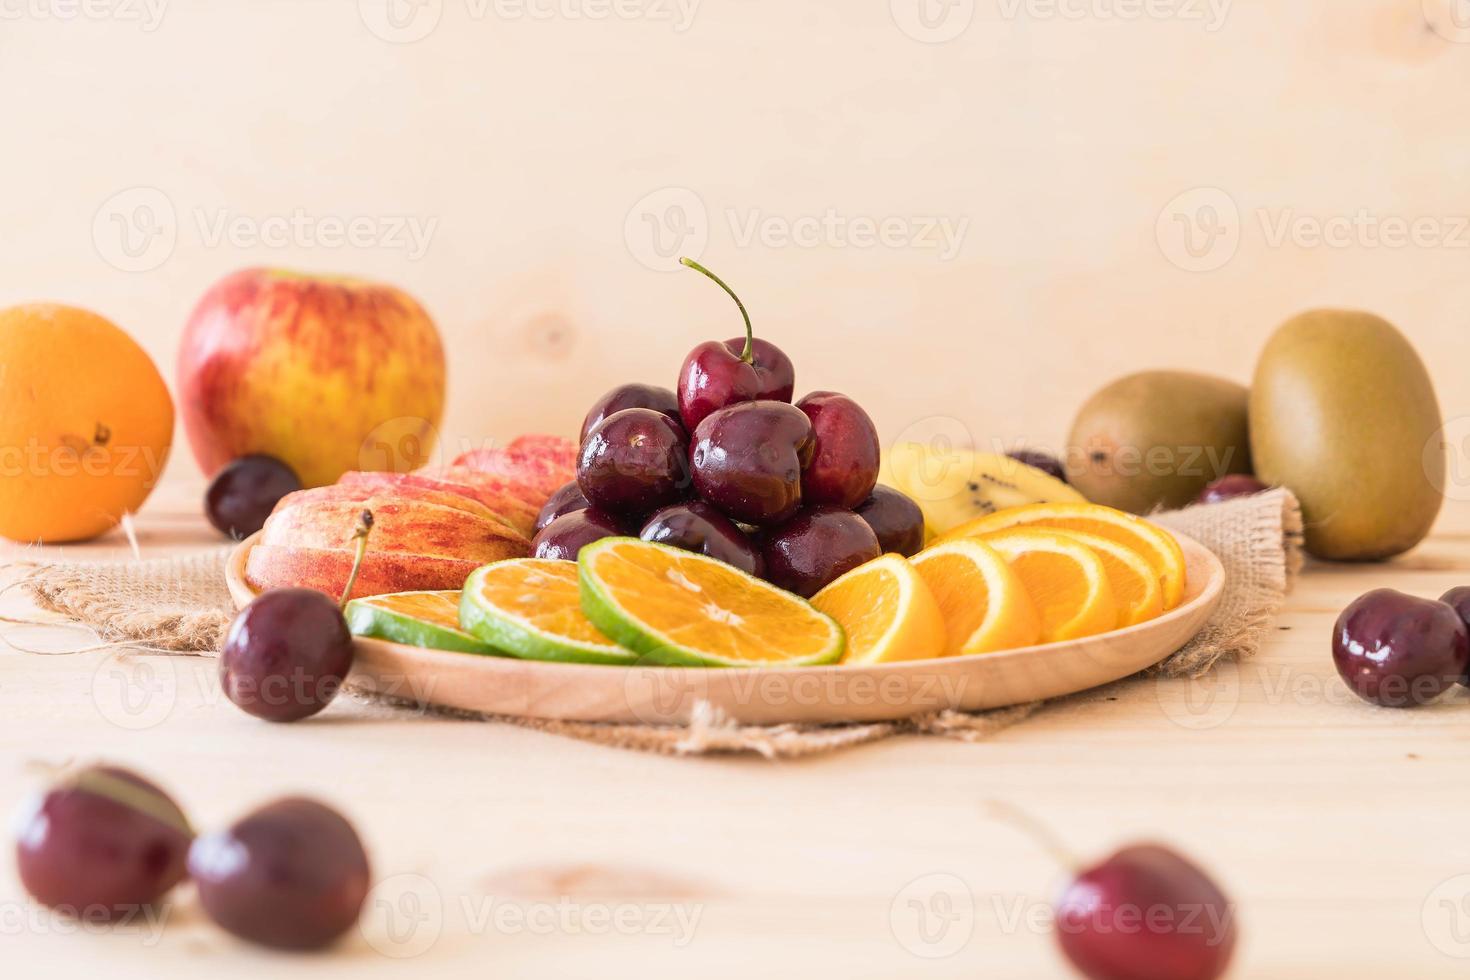 Mixed sliced fruit in wood bowl photo